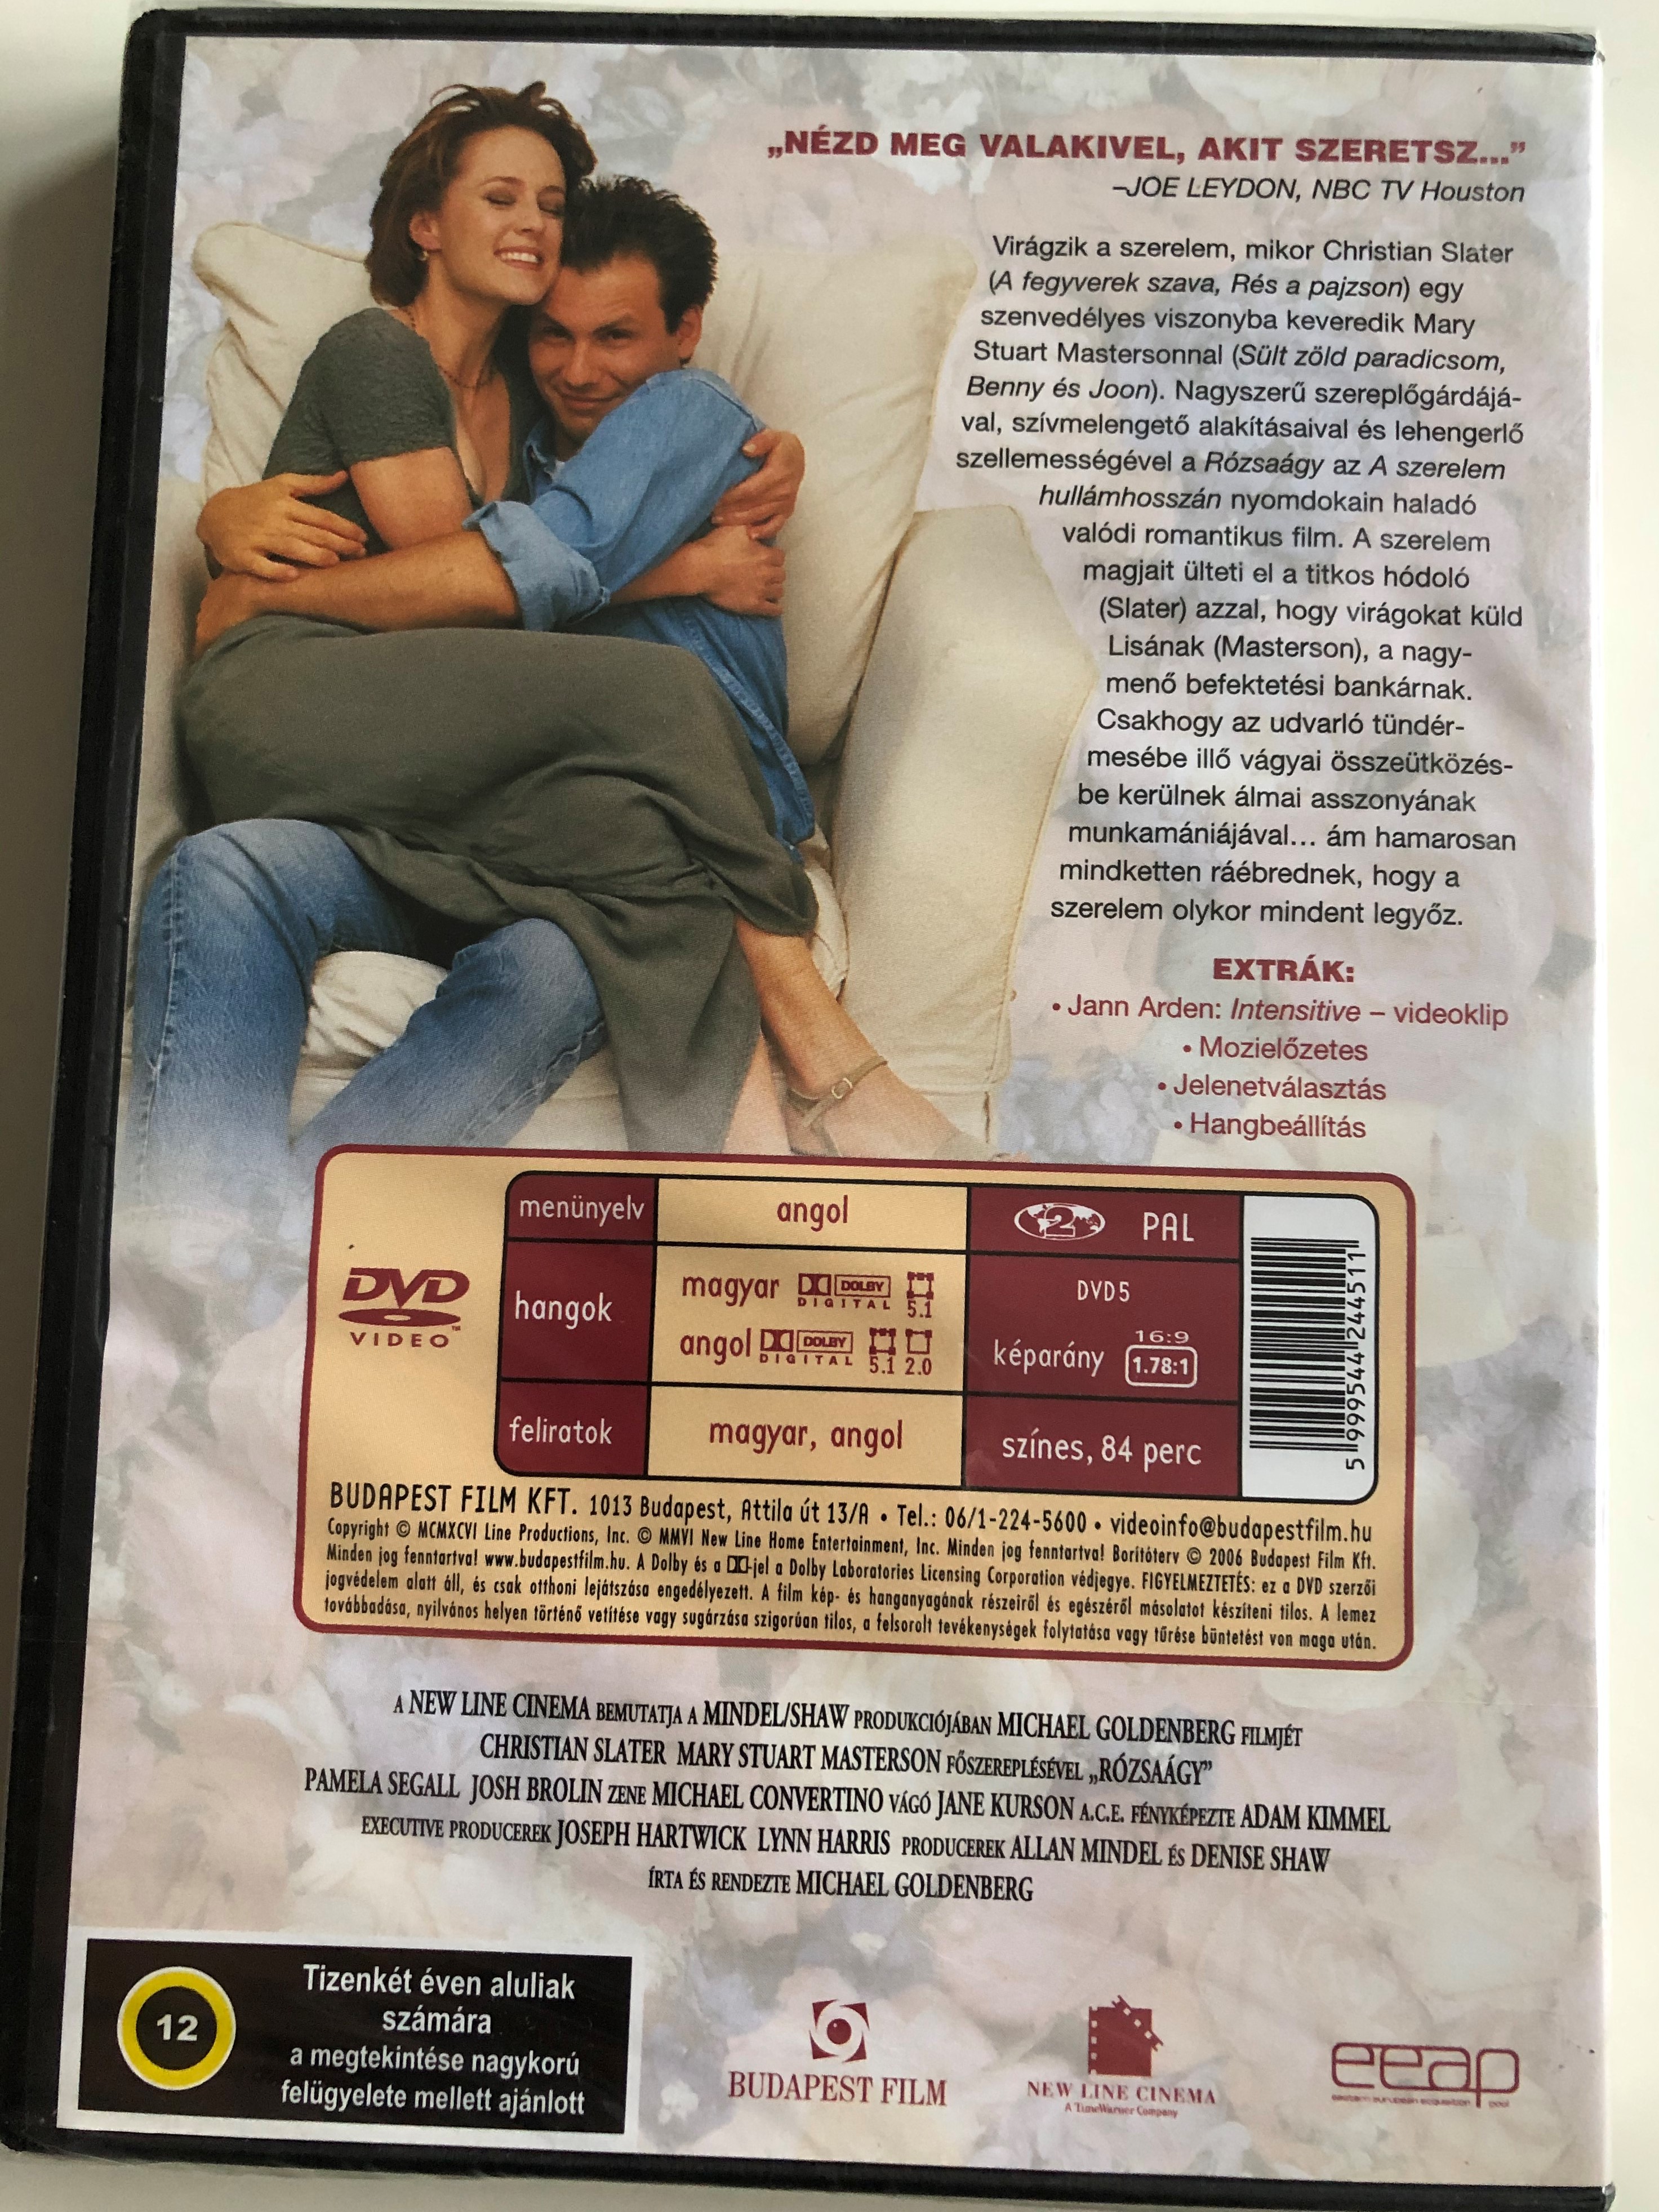 Bed of Roses DVD 1996 Rózsaágy / Directed by Michael Goldenberg / Starring:  Christian Slater, Mary Stuart Masterson - Bible in My Language